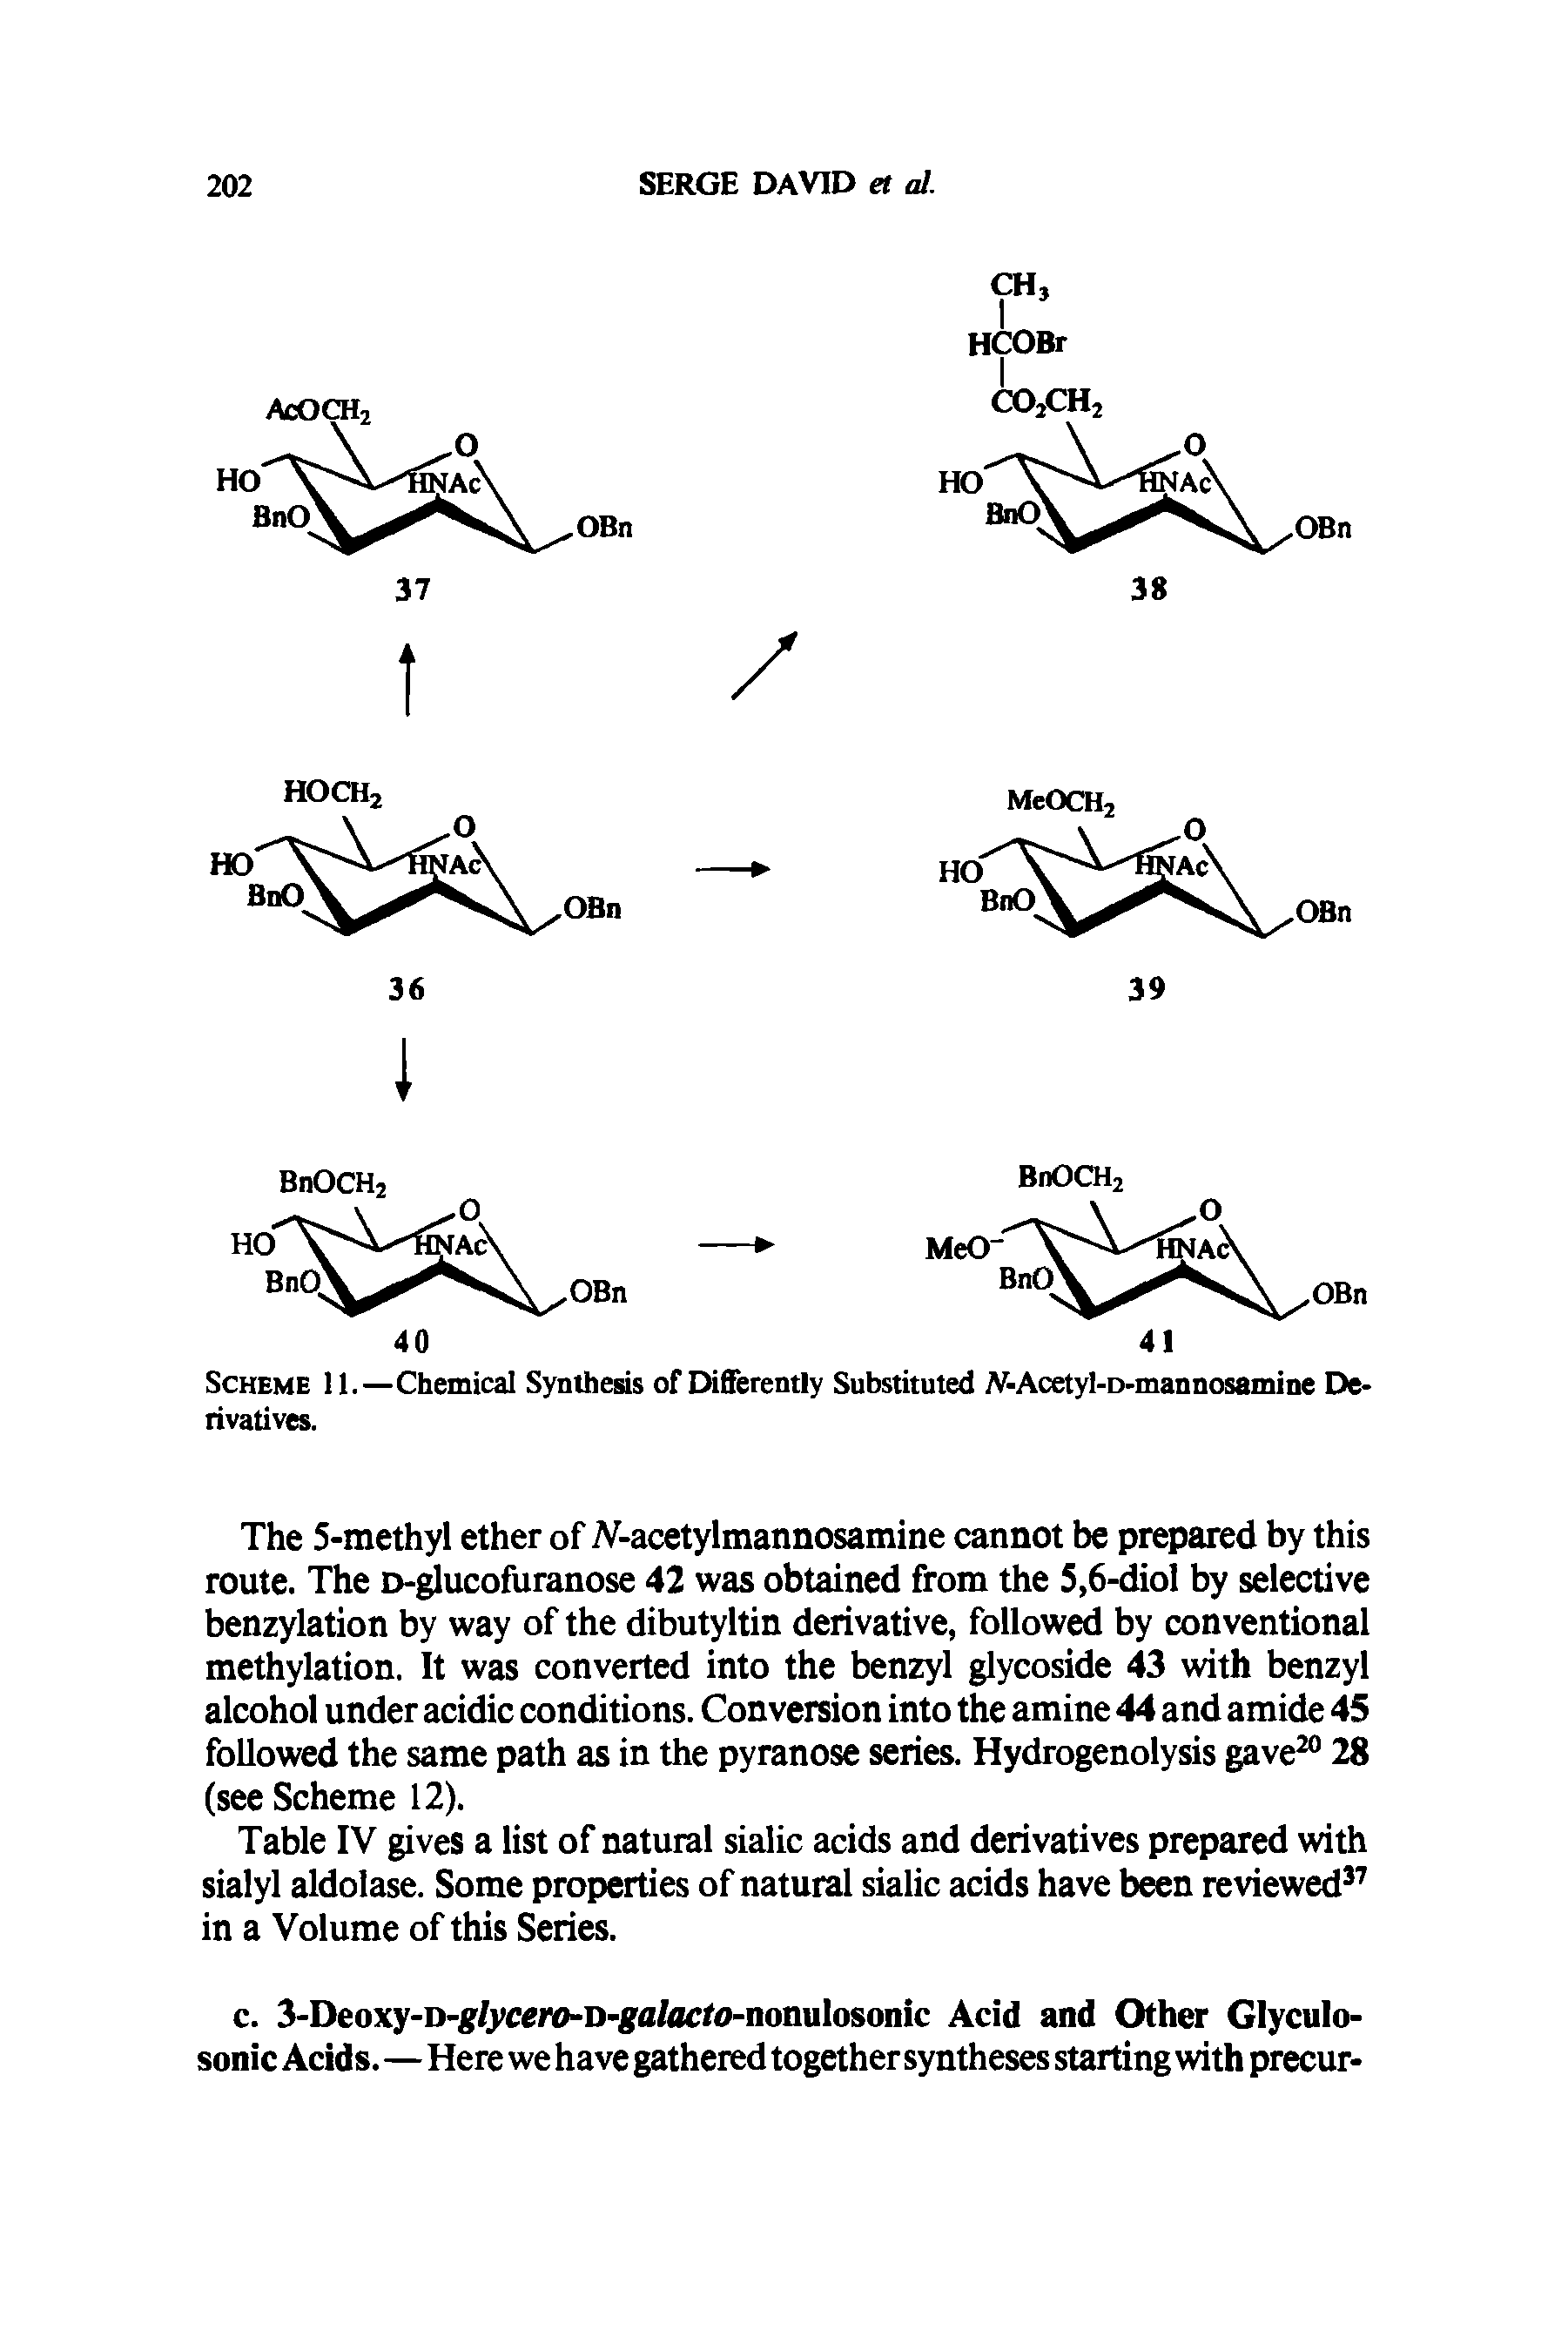 Scheme 11.—Chemical Synthesis of Differently Substituted W-Acetyl-D-mannosamine Derivatives.